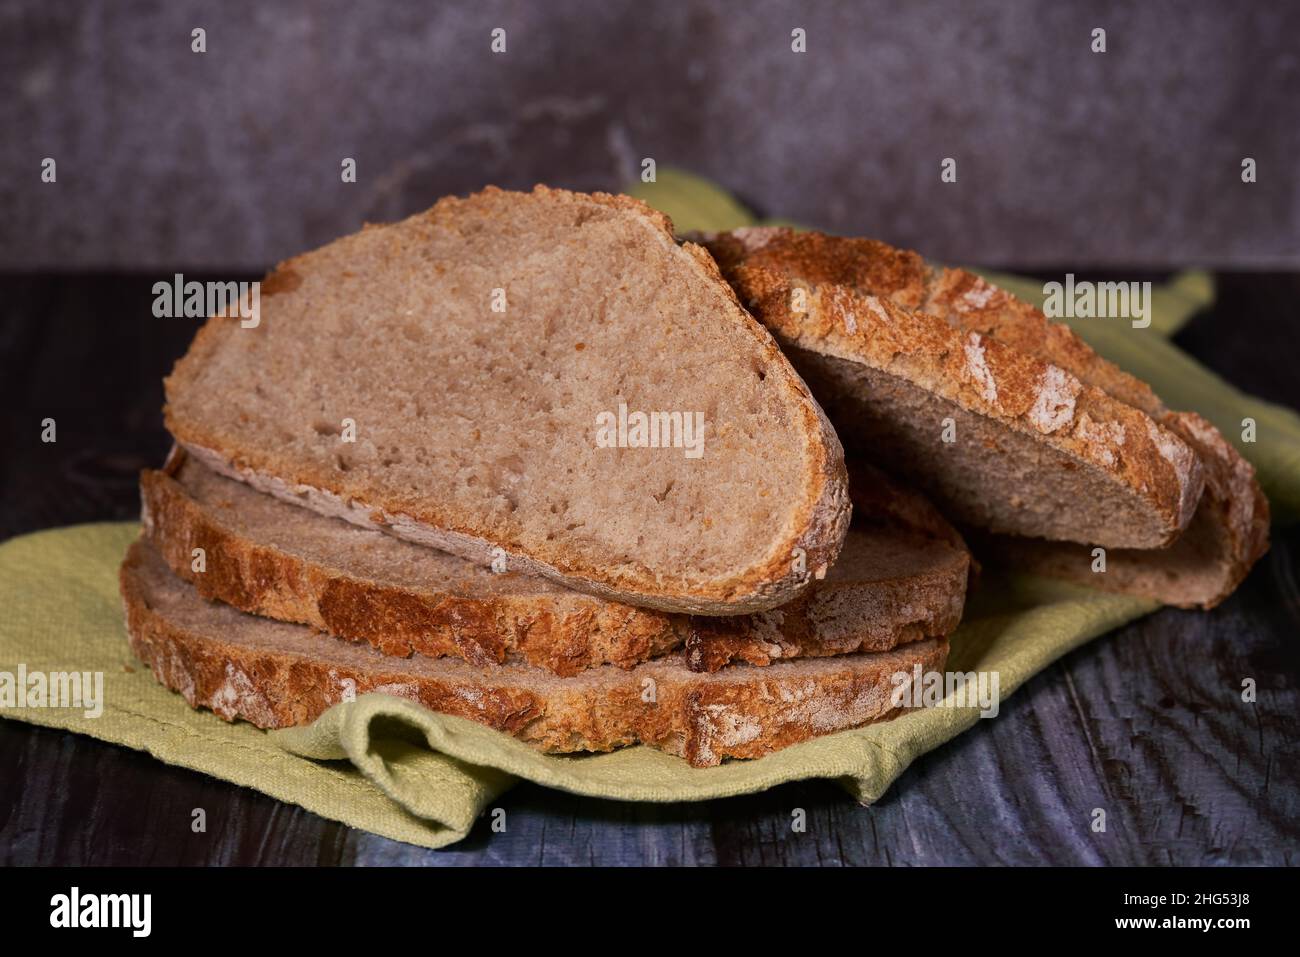 Slices of healthy homemade organic bread Stock Photo